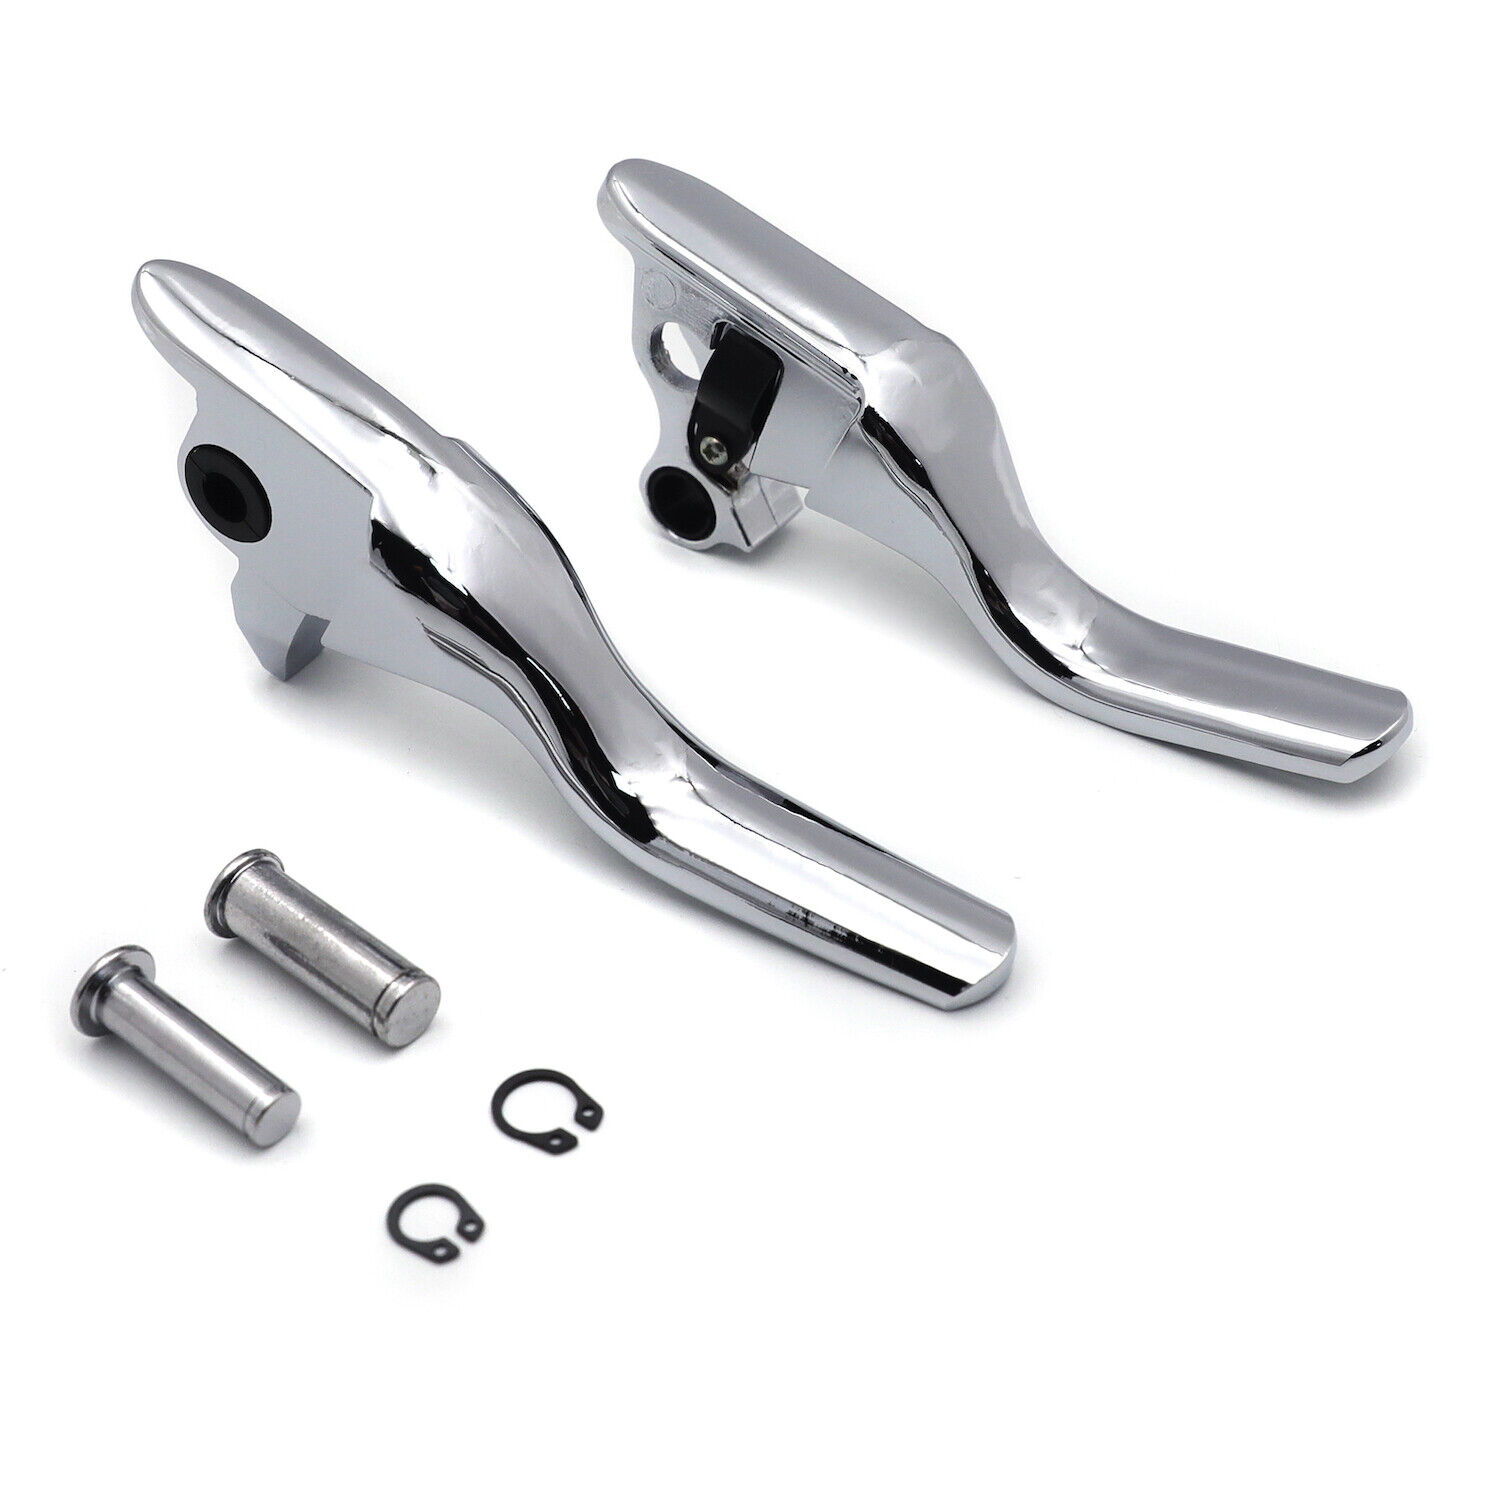 Chrome Smooth Shorty Brake Clutch Levers For Harley 2008-2013 Touring Trike